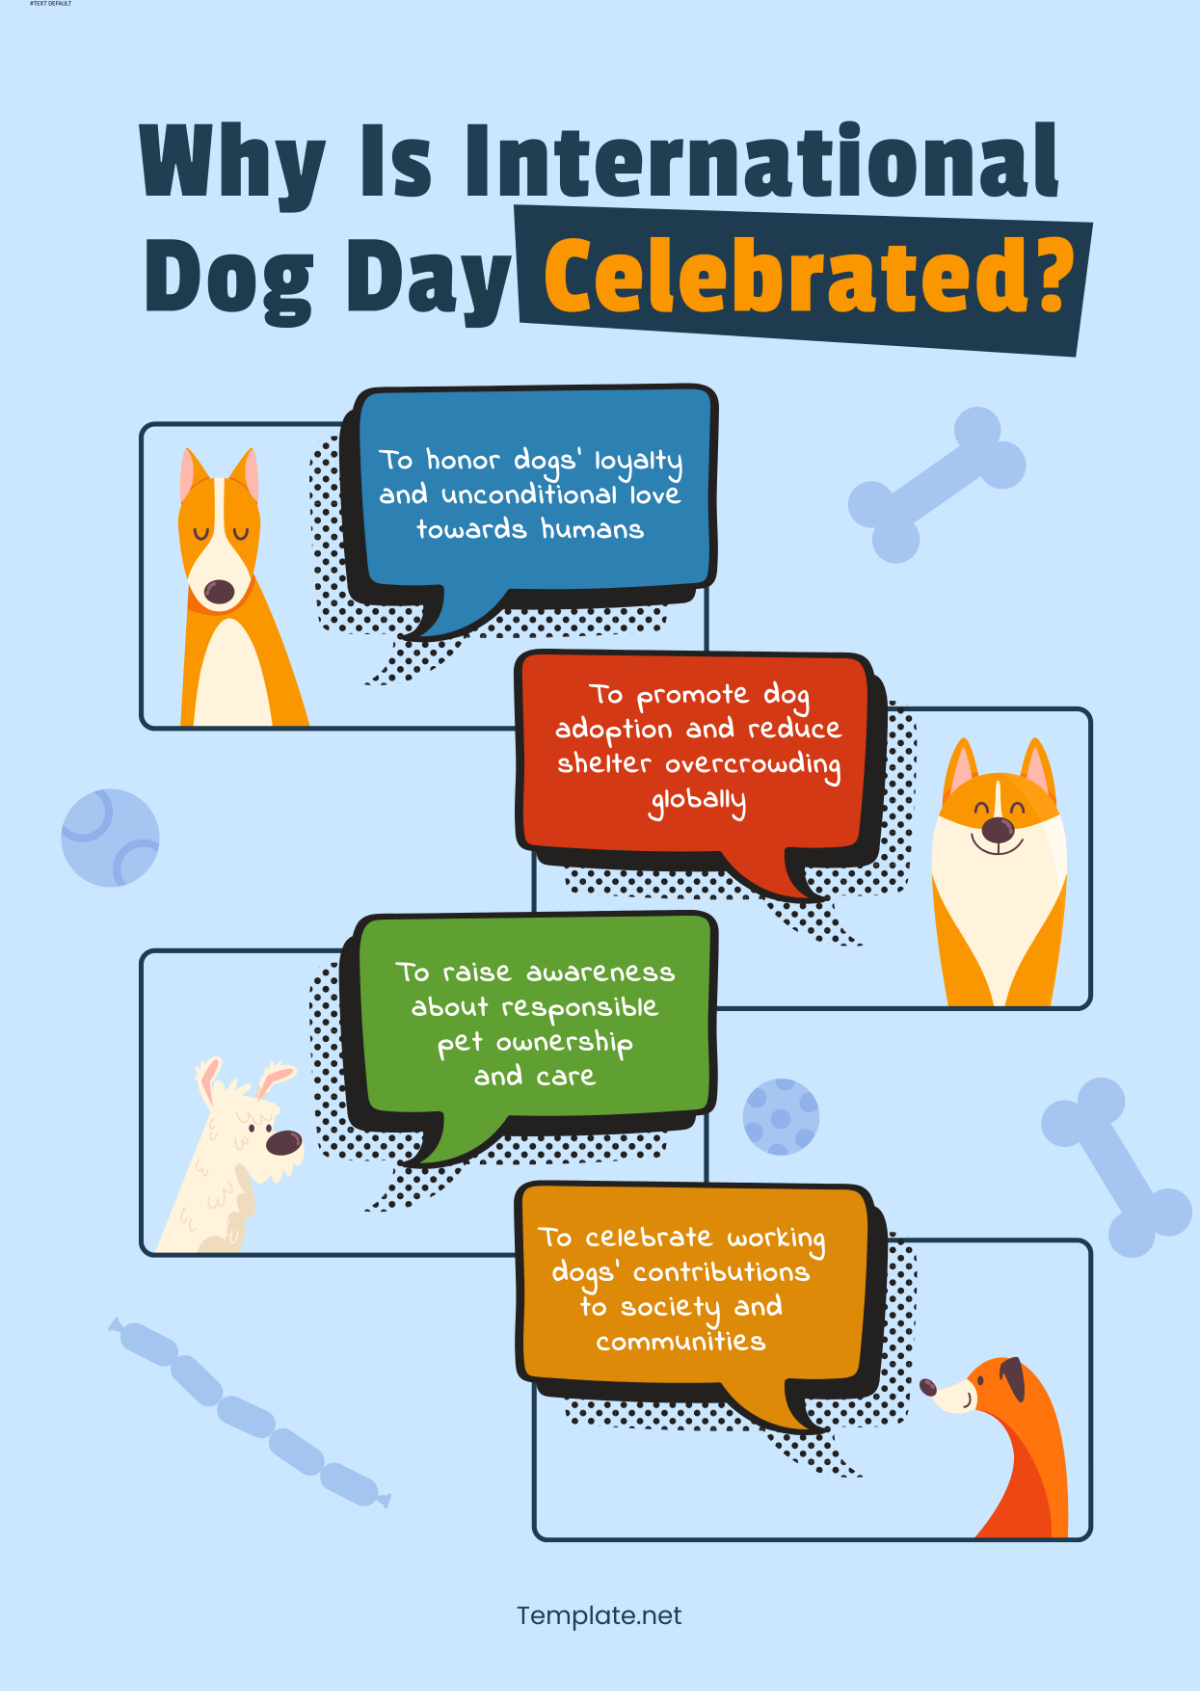 Why is International Dog Day Celebrated?